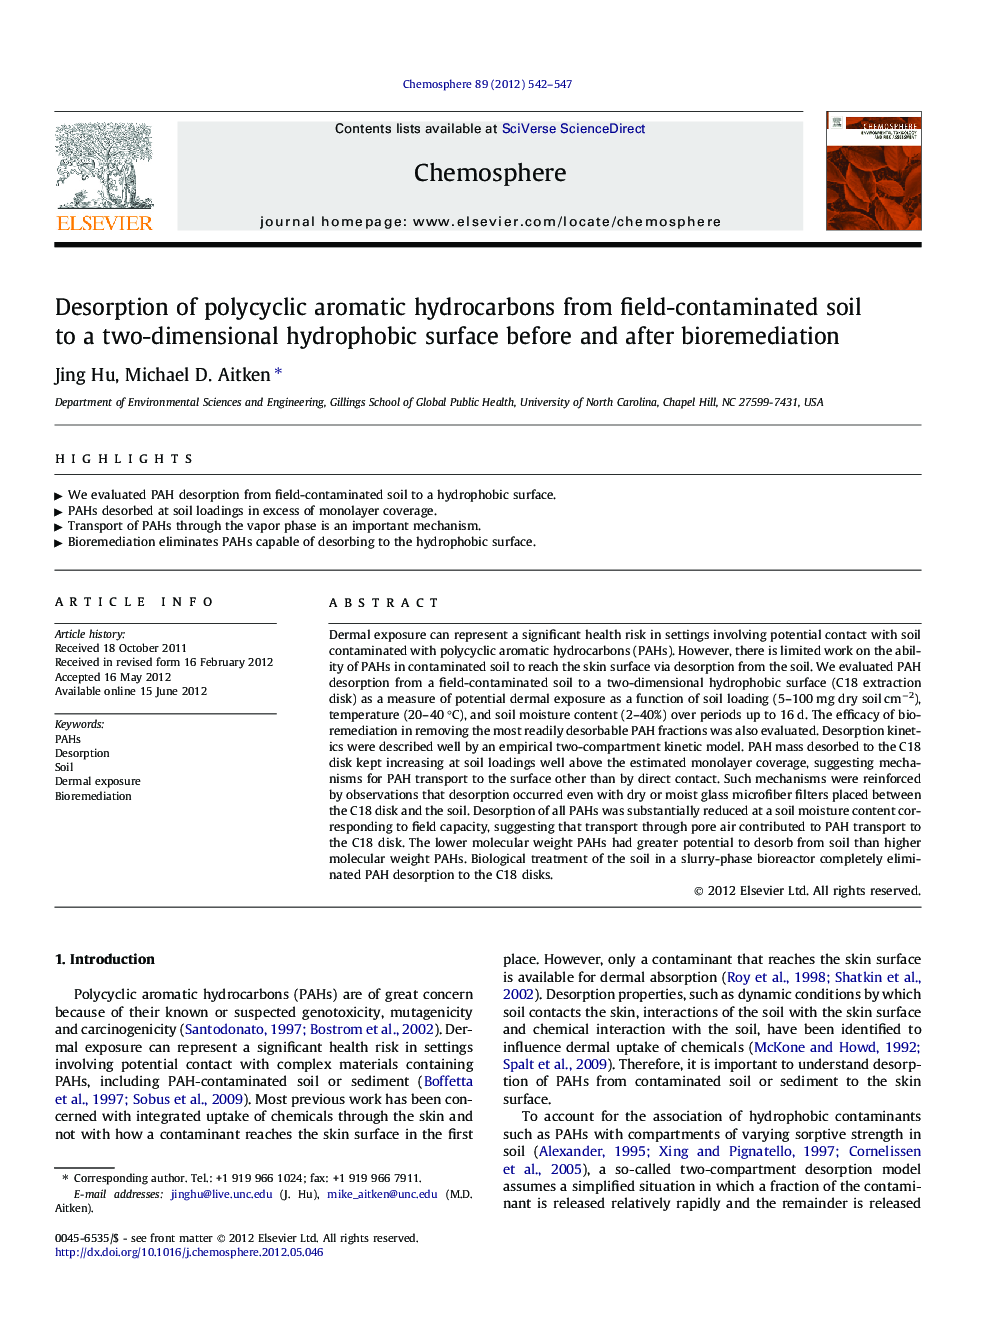 Desorption of polycyclic aromatic hydrocarbons from field-contaminated soil to a two-dimensional hydrophobic surface before and after bioremediation